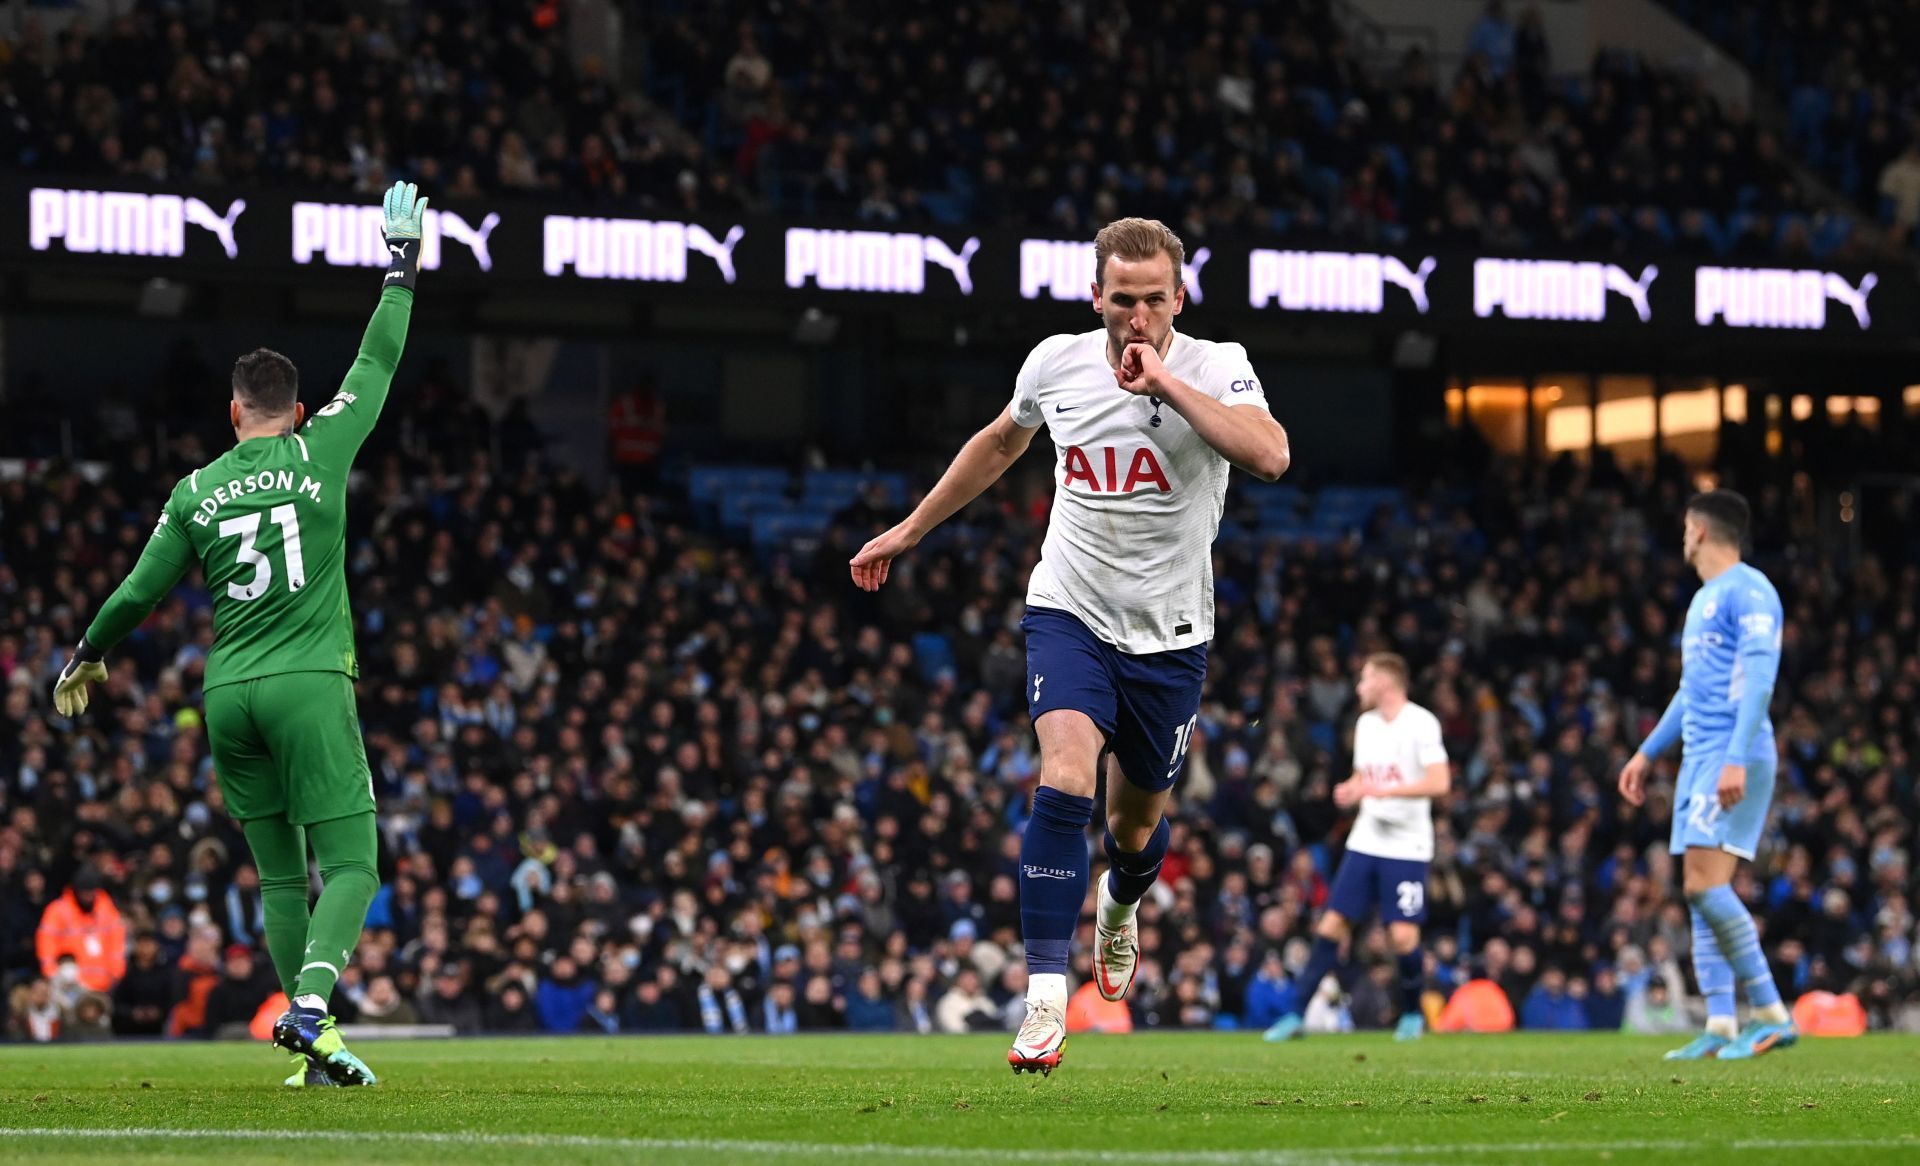  Tottenham Hotspur duo Harry Kane and Son Heung-min have equalled the all-time record for Premier League goal combinations